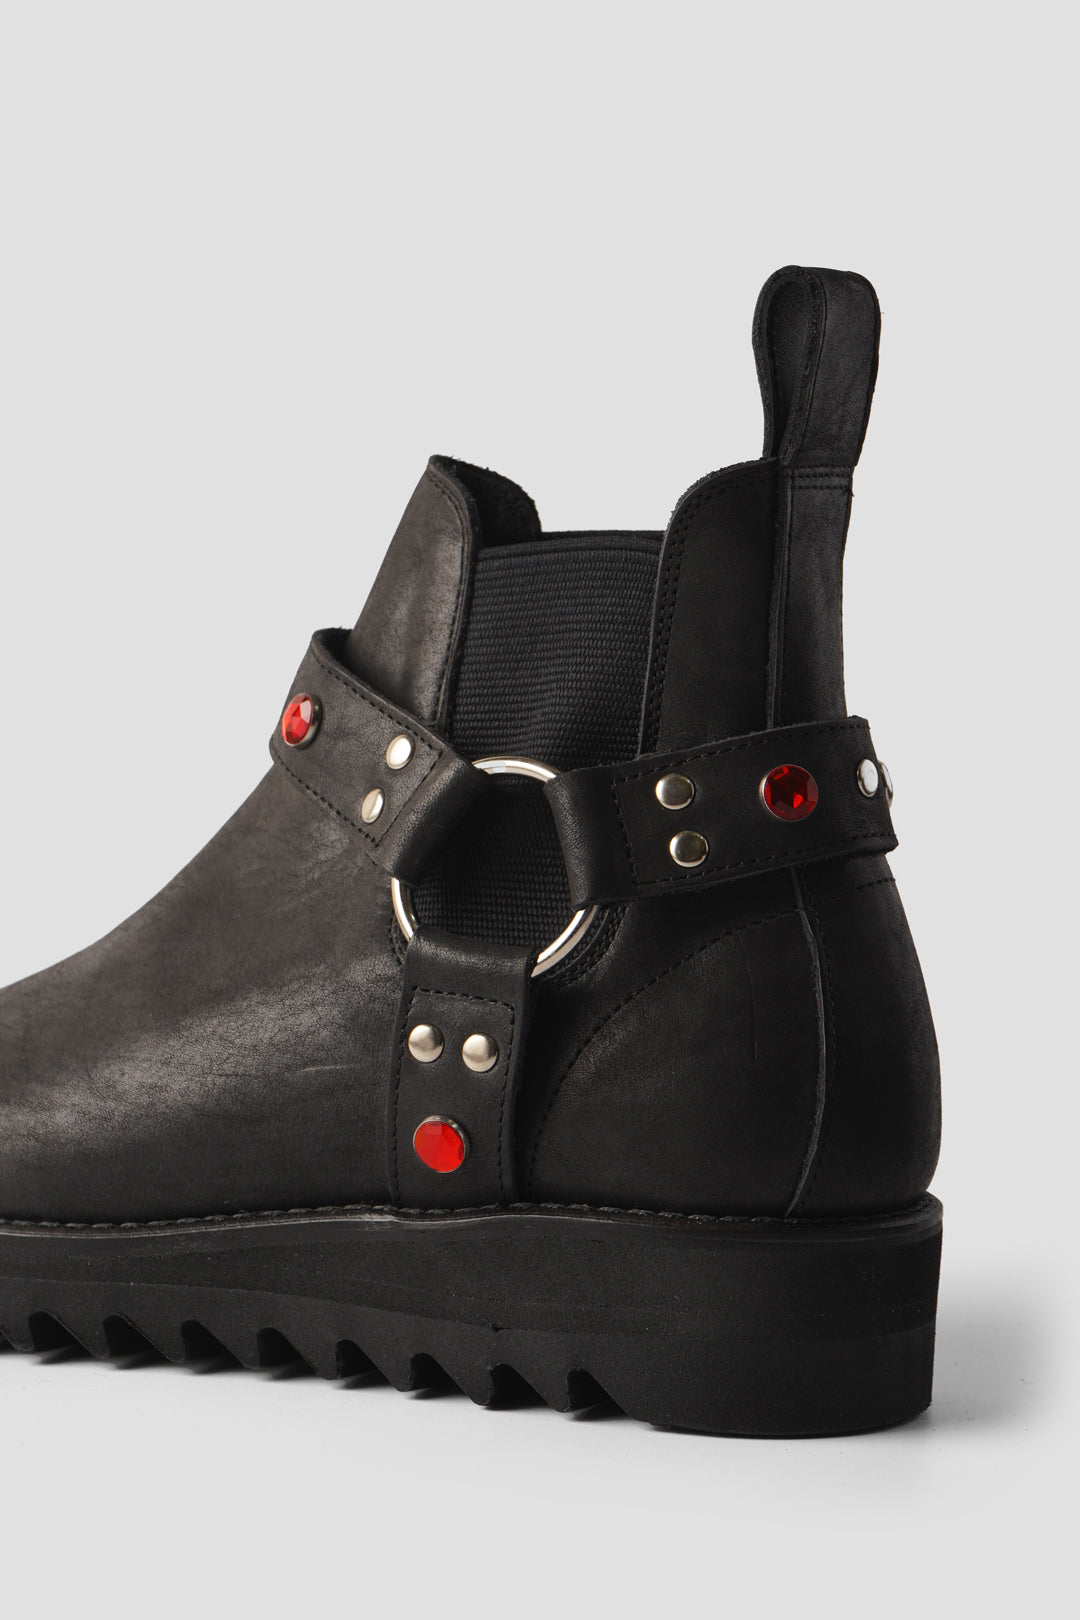 "STUDS RING BOOTS" TMTK-S-0044-02 BLACK LEATHER